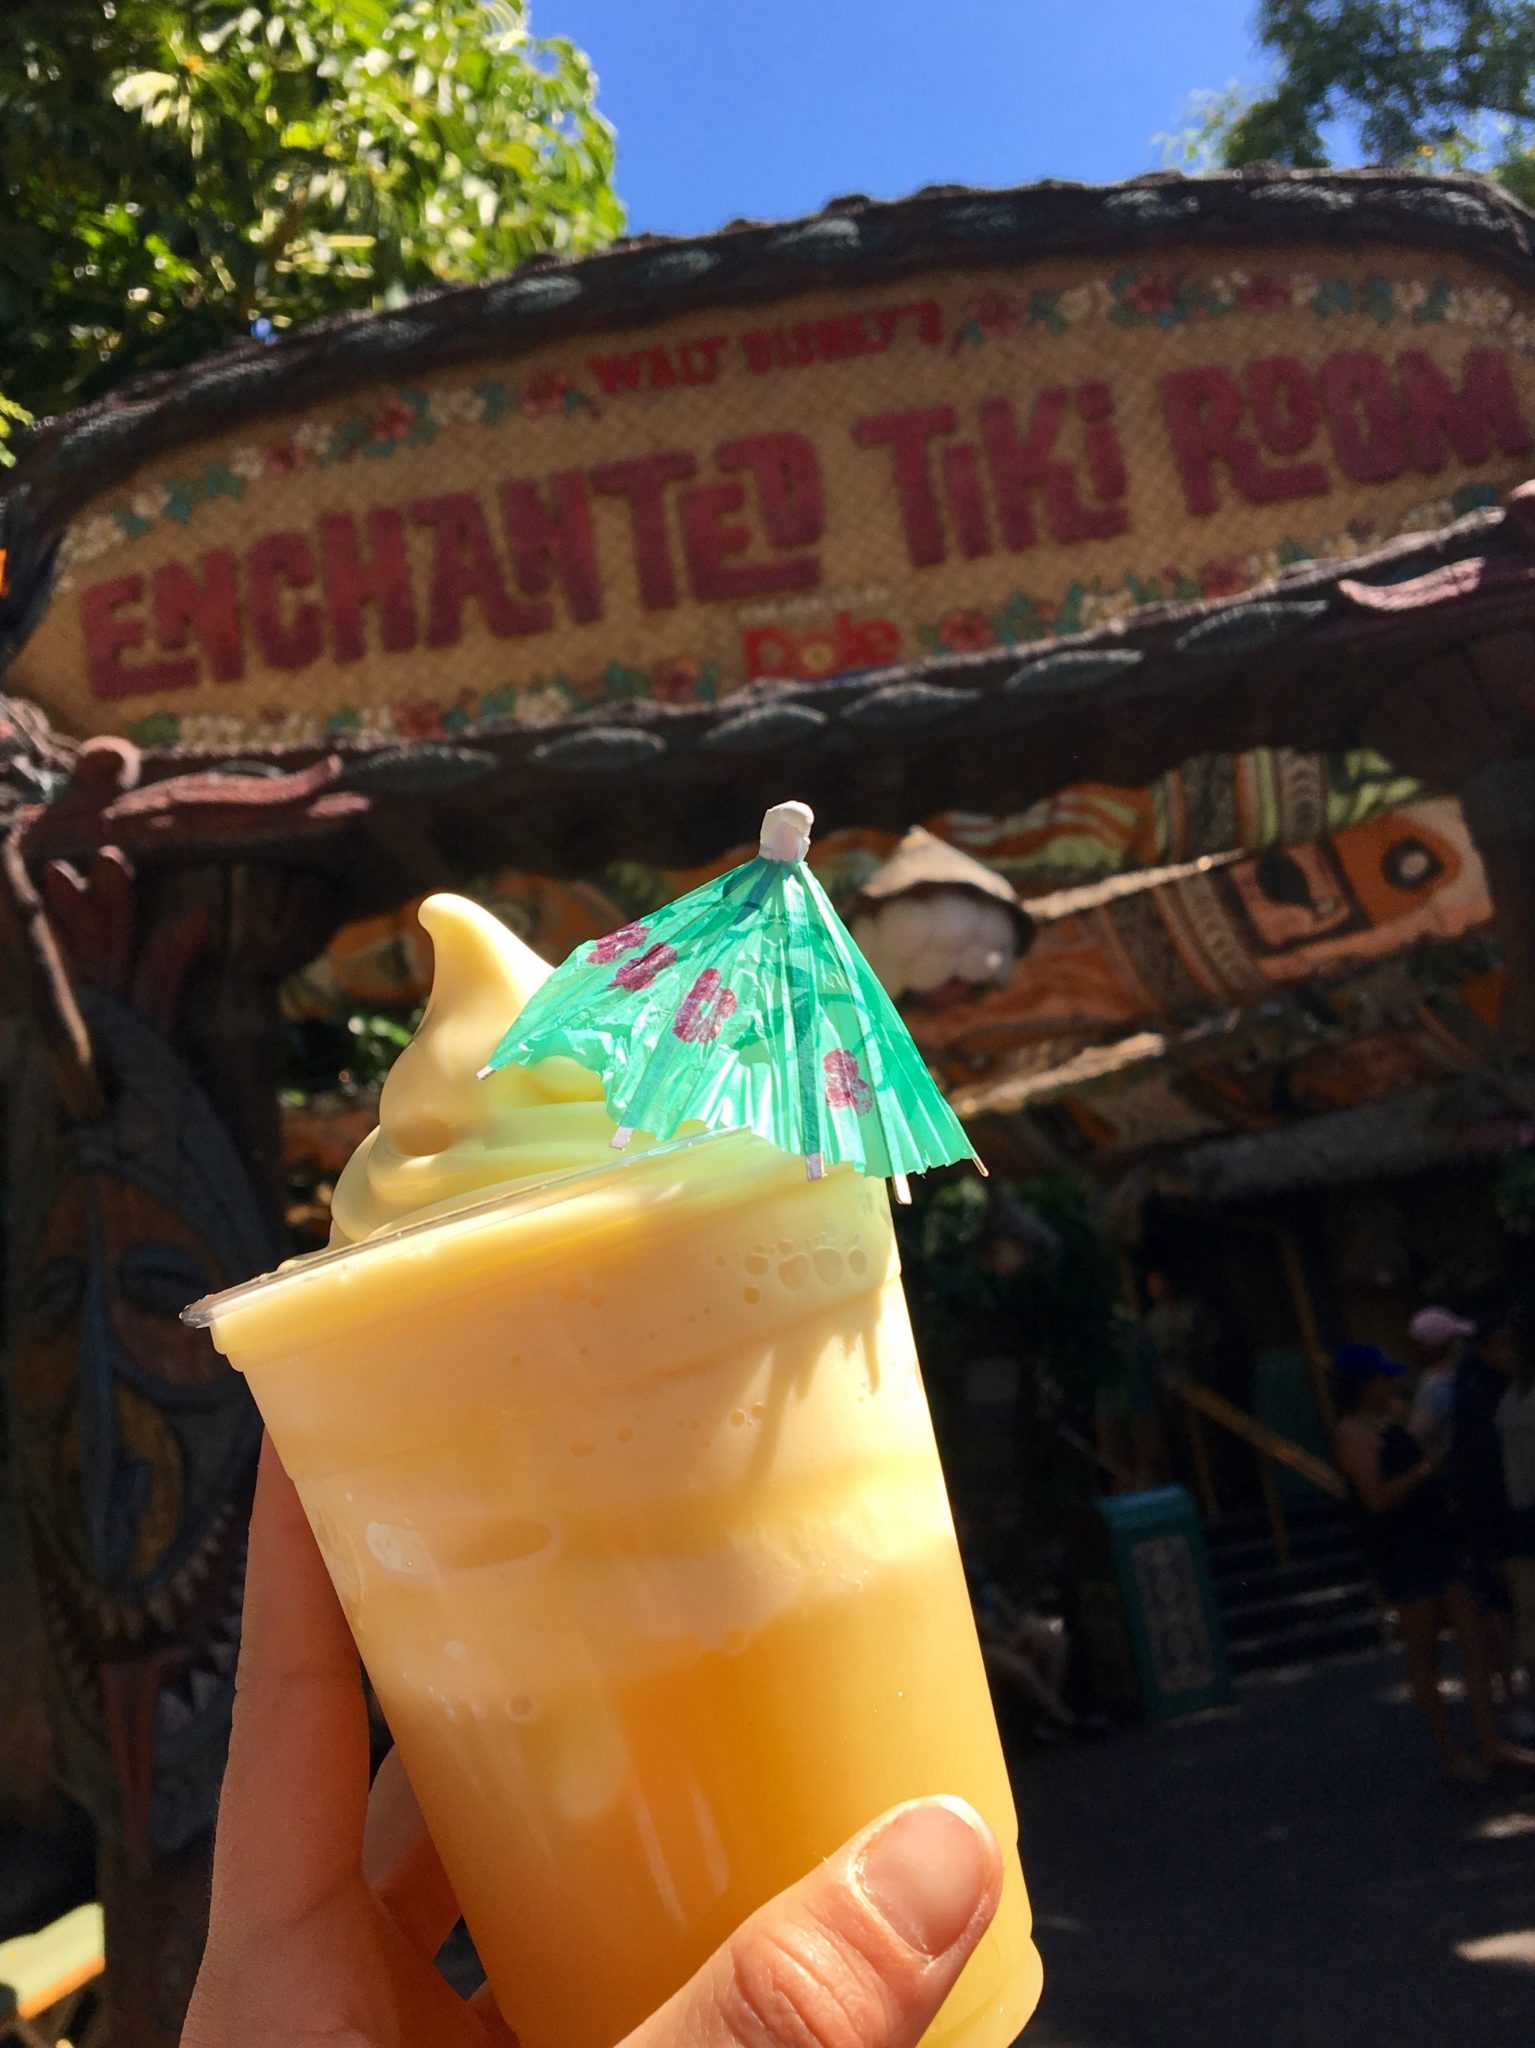 A Dole Whip Float Toast to the Tiki Room’s 54th Anniversary!